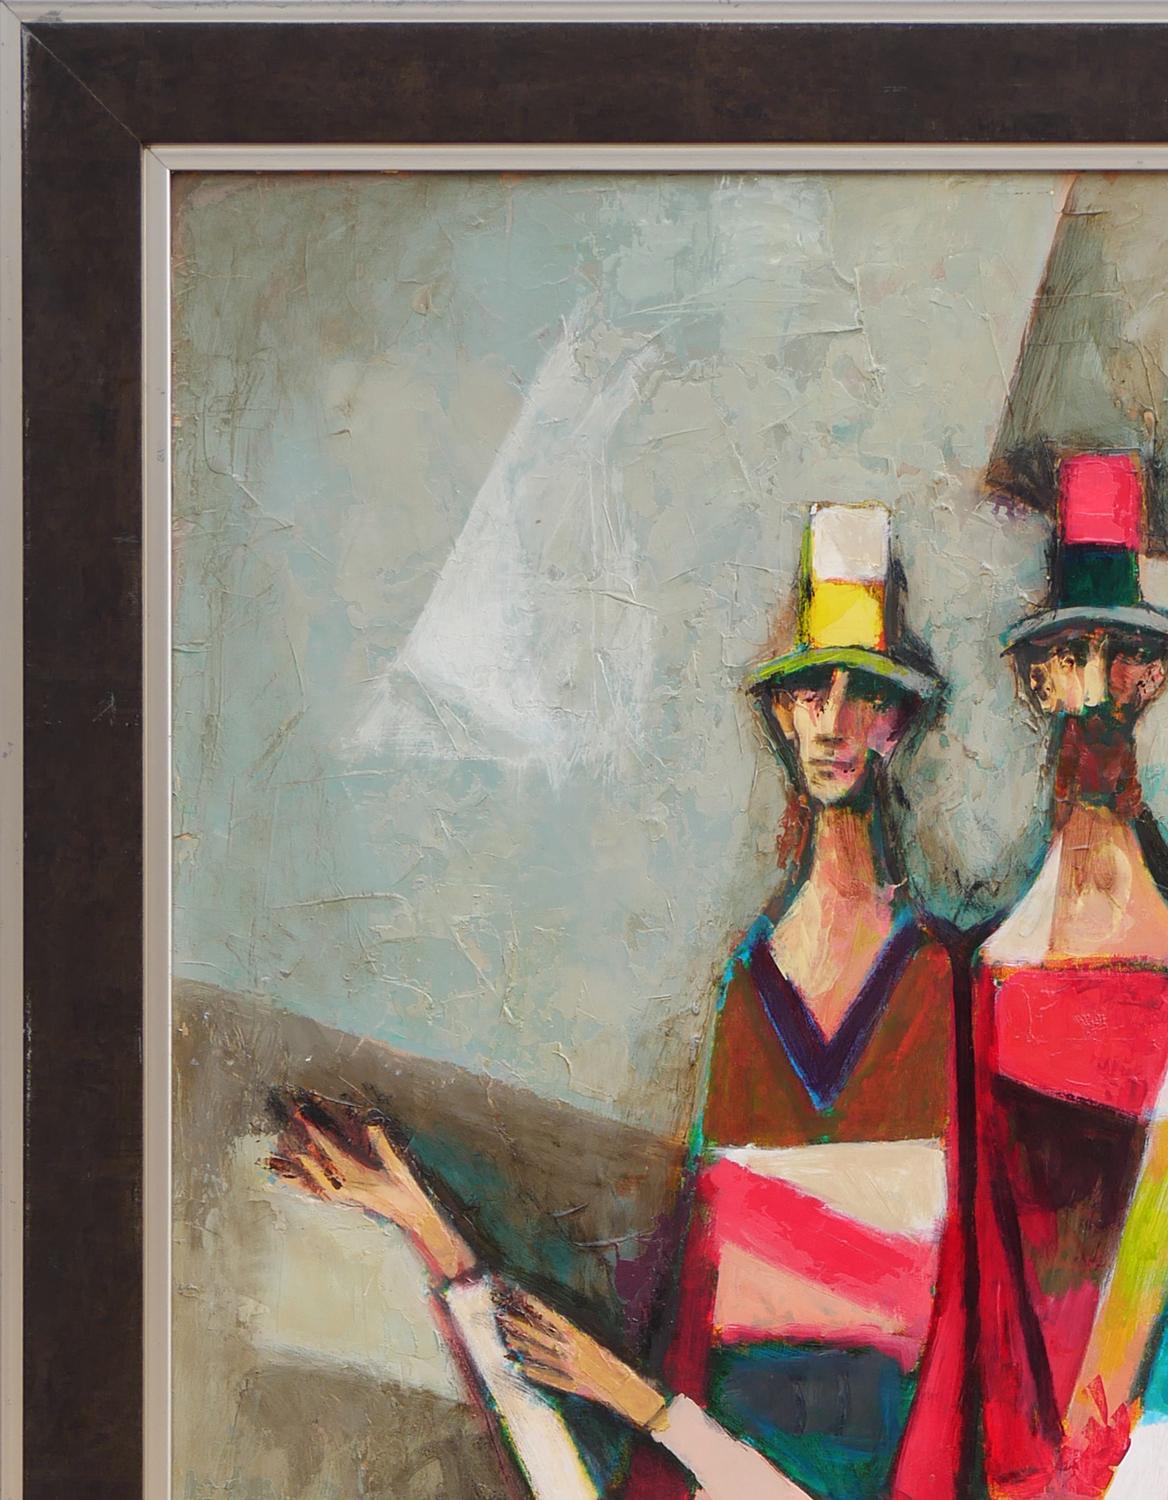 Modern abstract figurative portrait painting by Houston, TX artist David Adickes. The work features a central group of three male figures wearing colorful clothes and hats set against a neutral grey toned Cubist inspired background. Signed by the